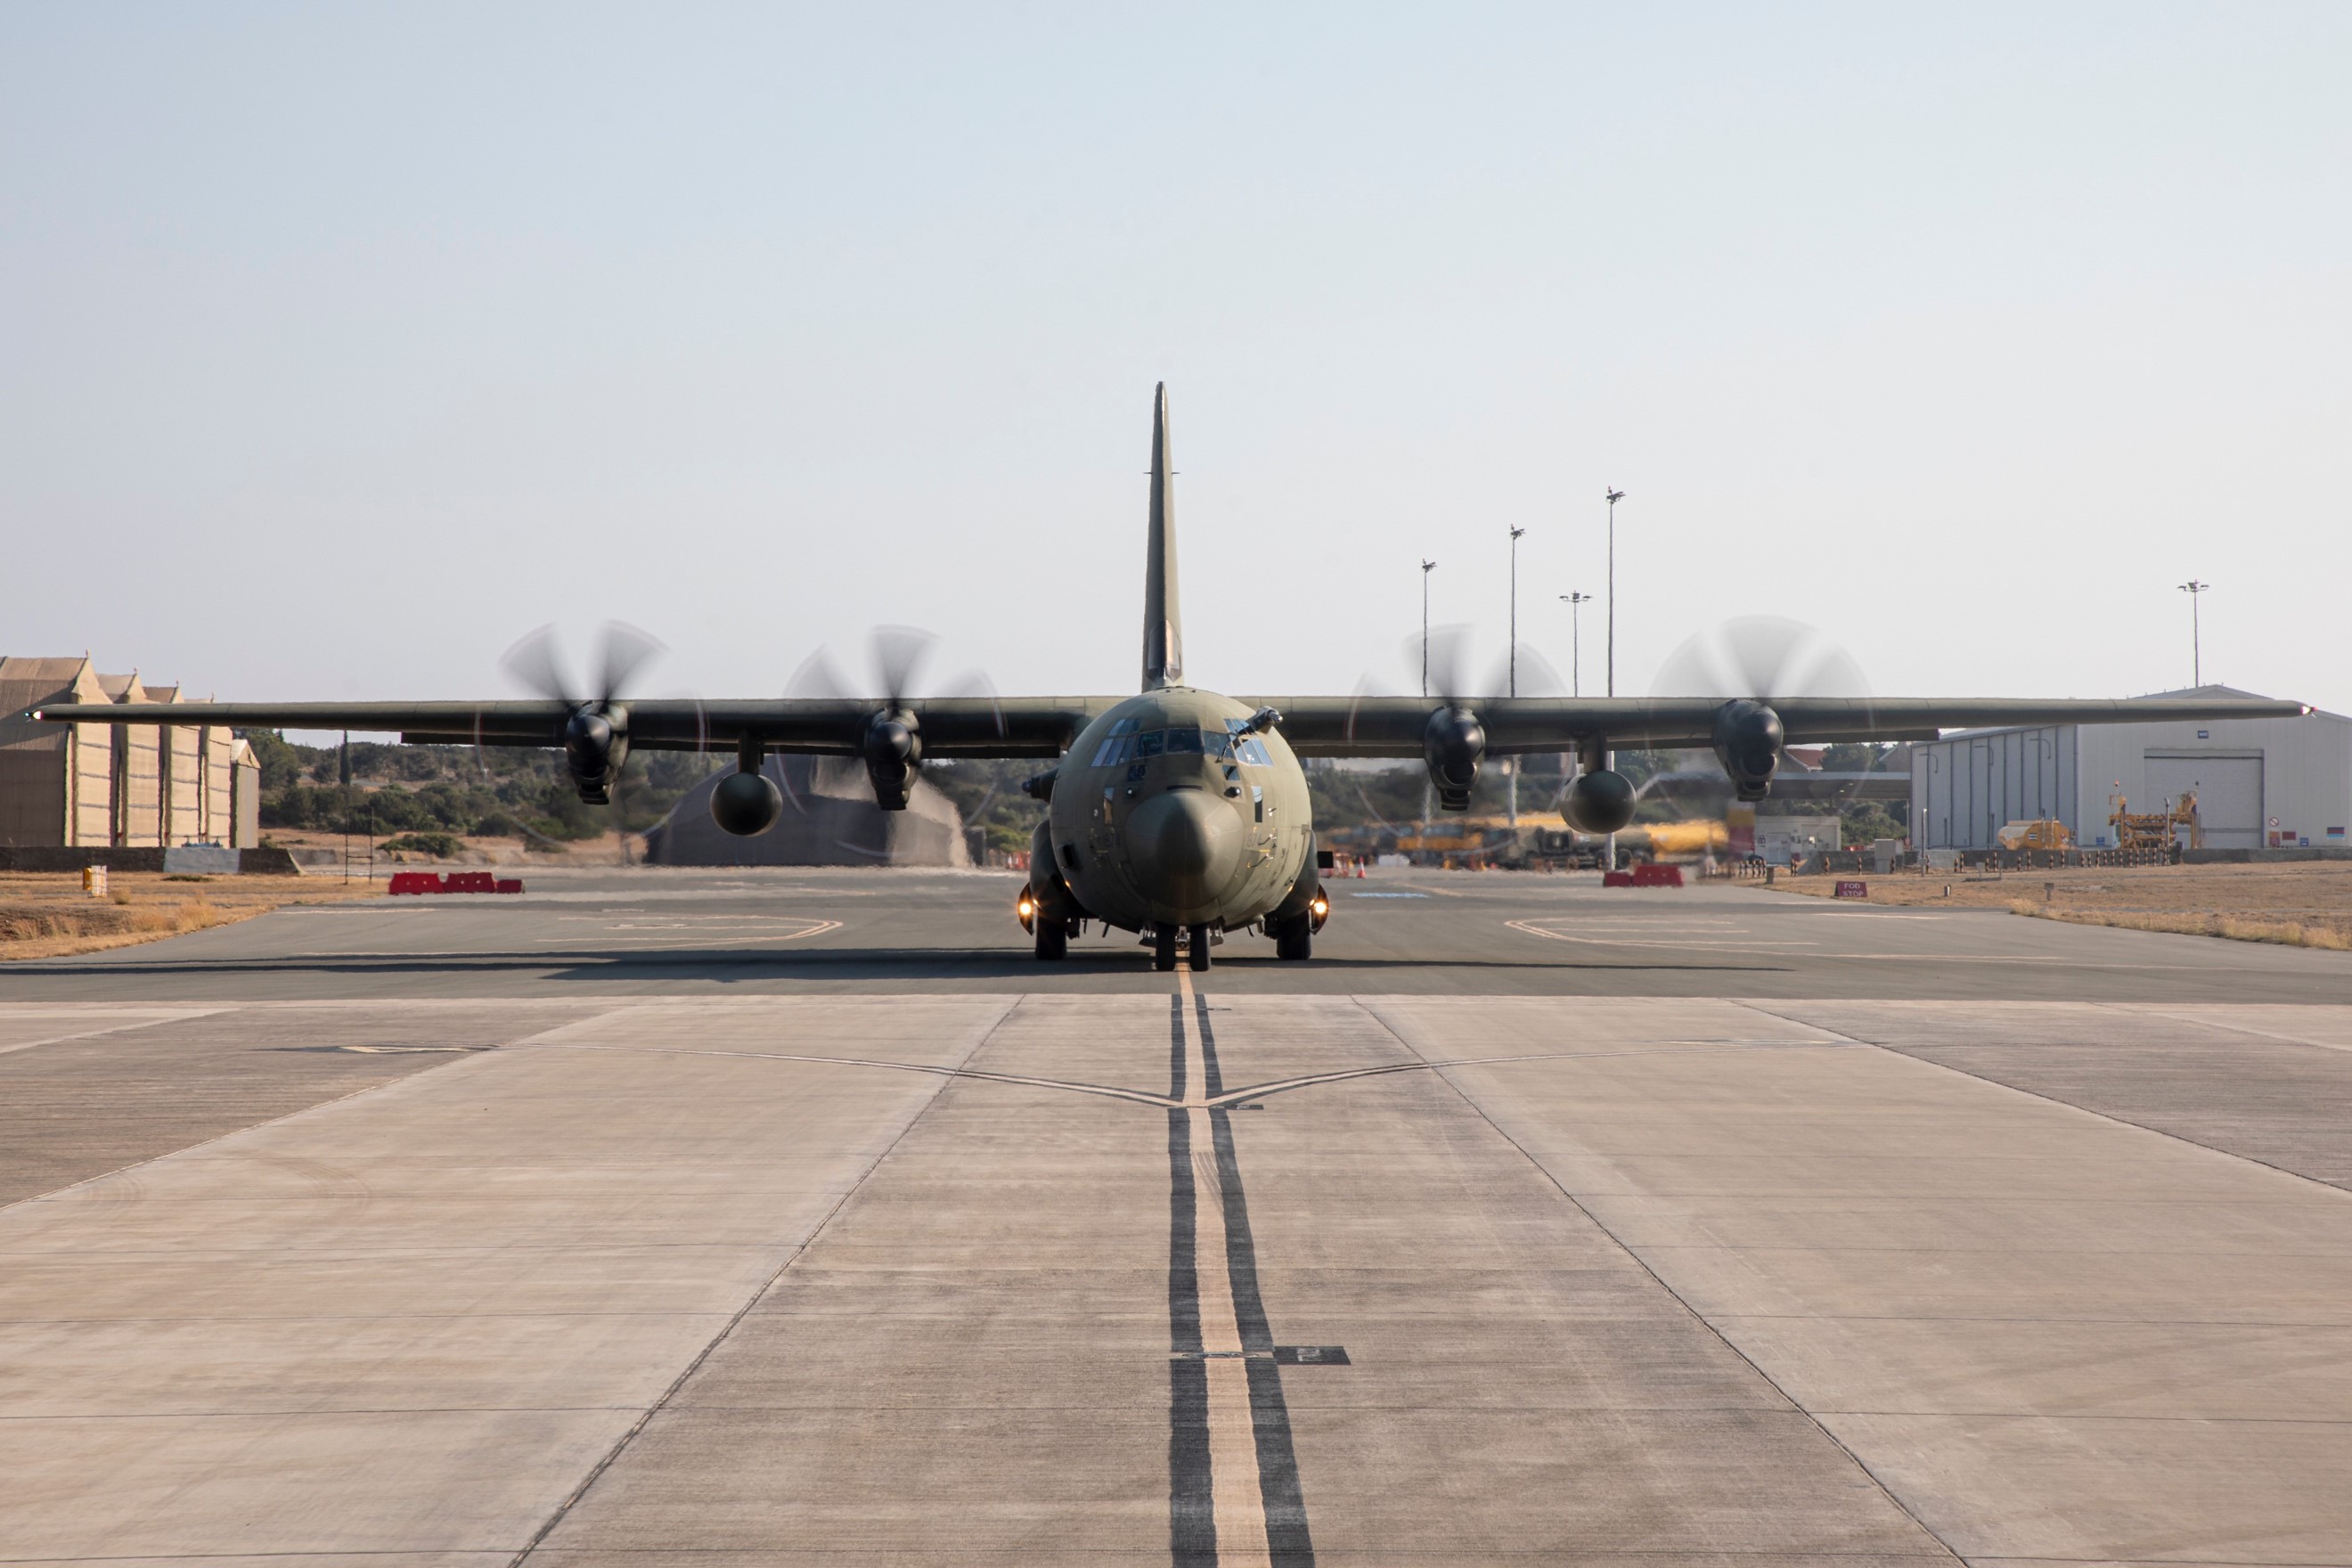 Image shows a C-130J Hercules on the runway about to take off.